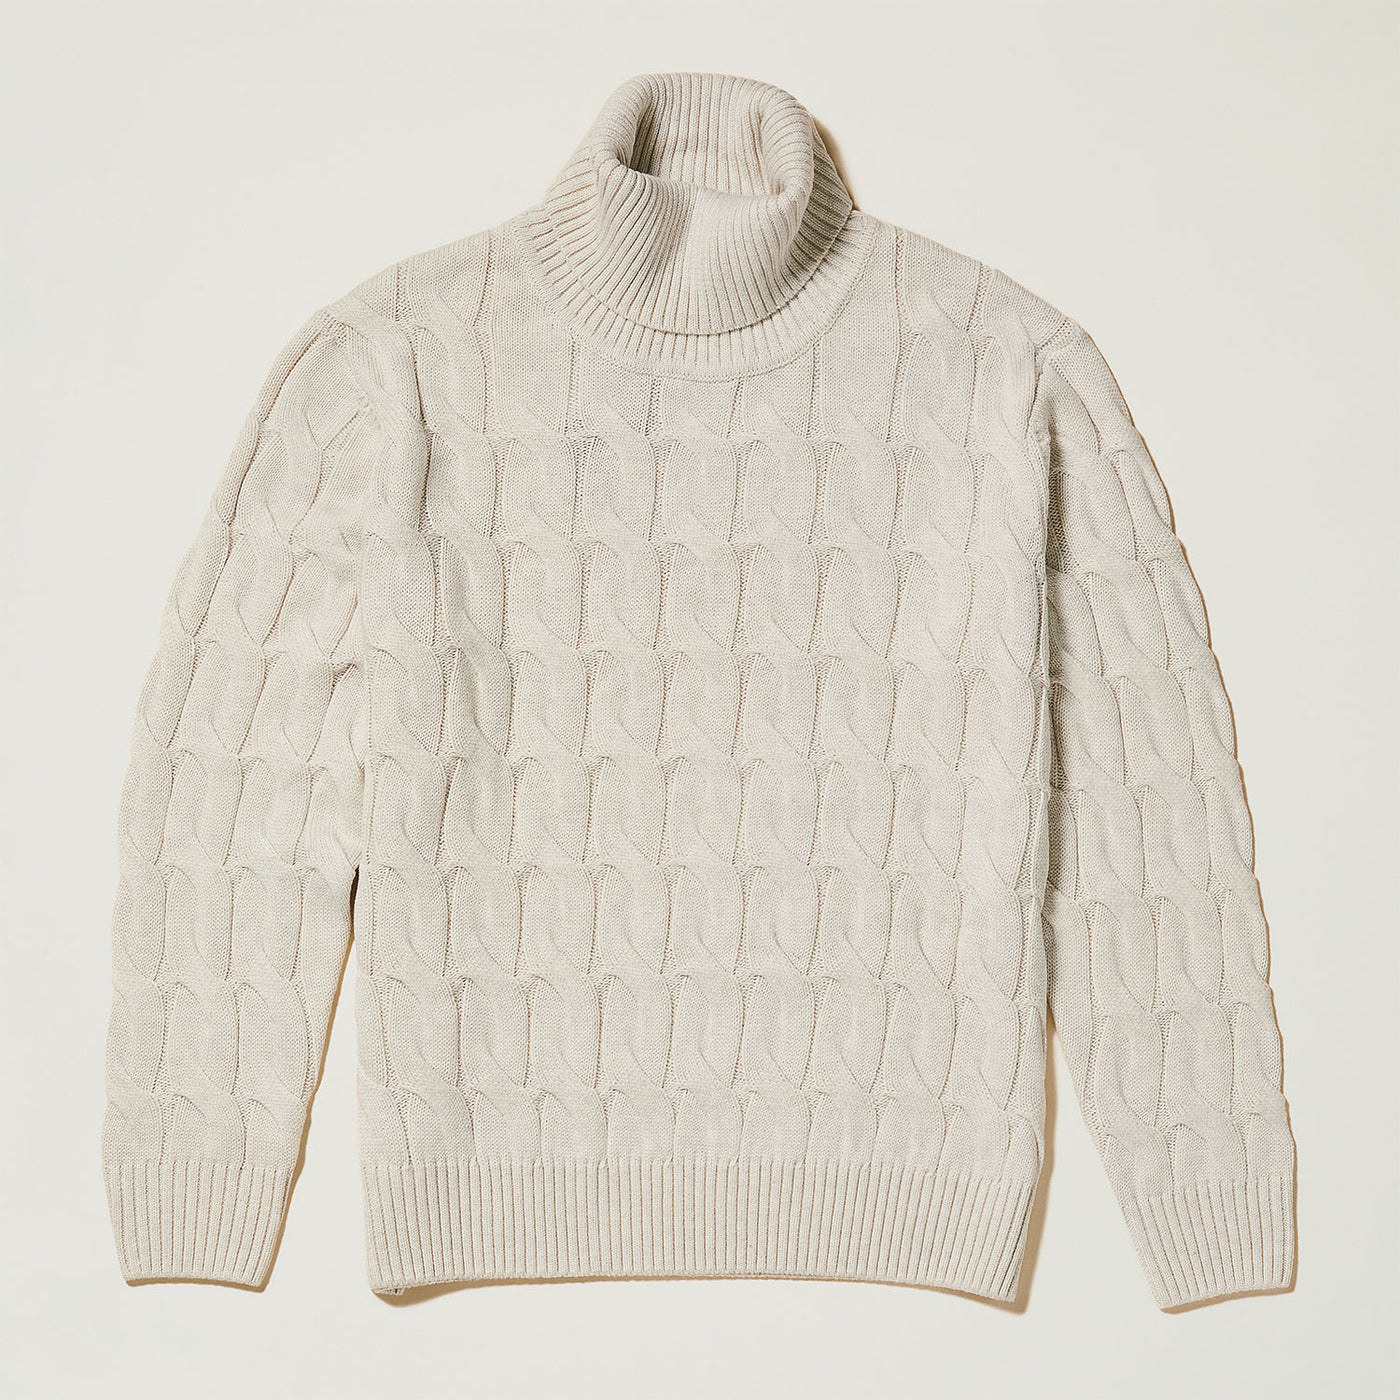 Cotton Blend Bold Cable Knit Turtleneck Sweater - INSERCH